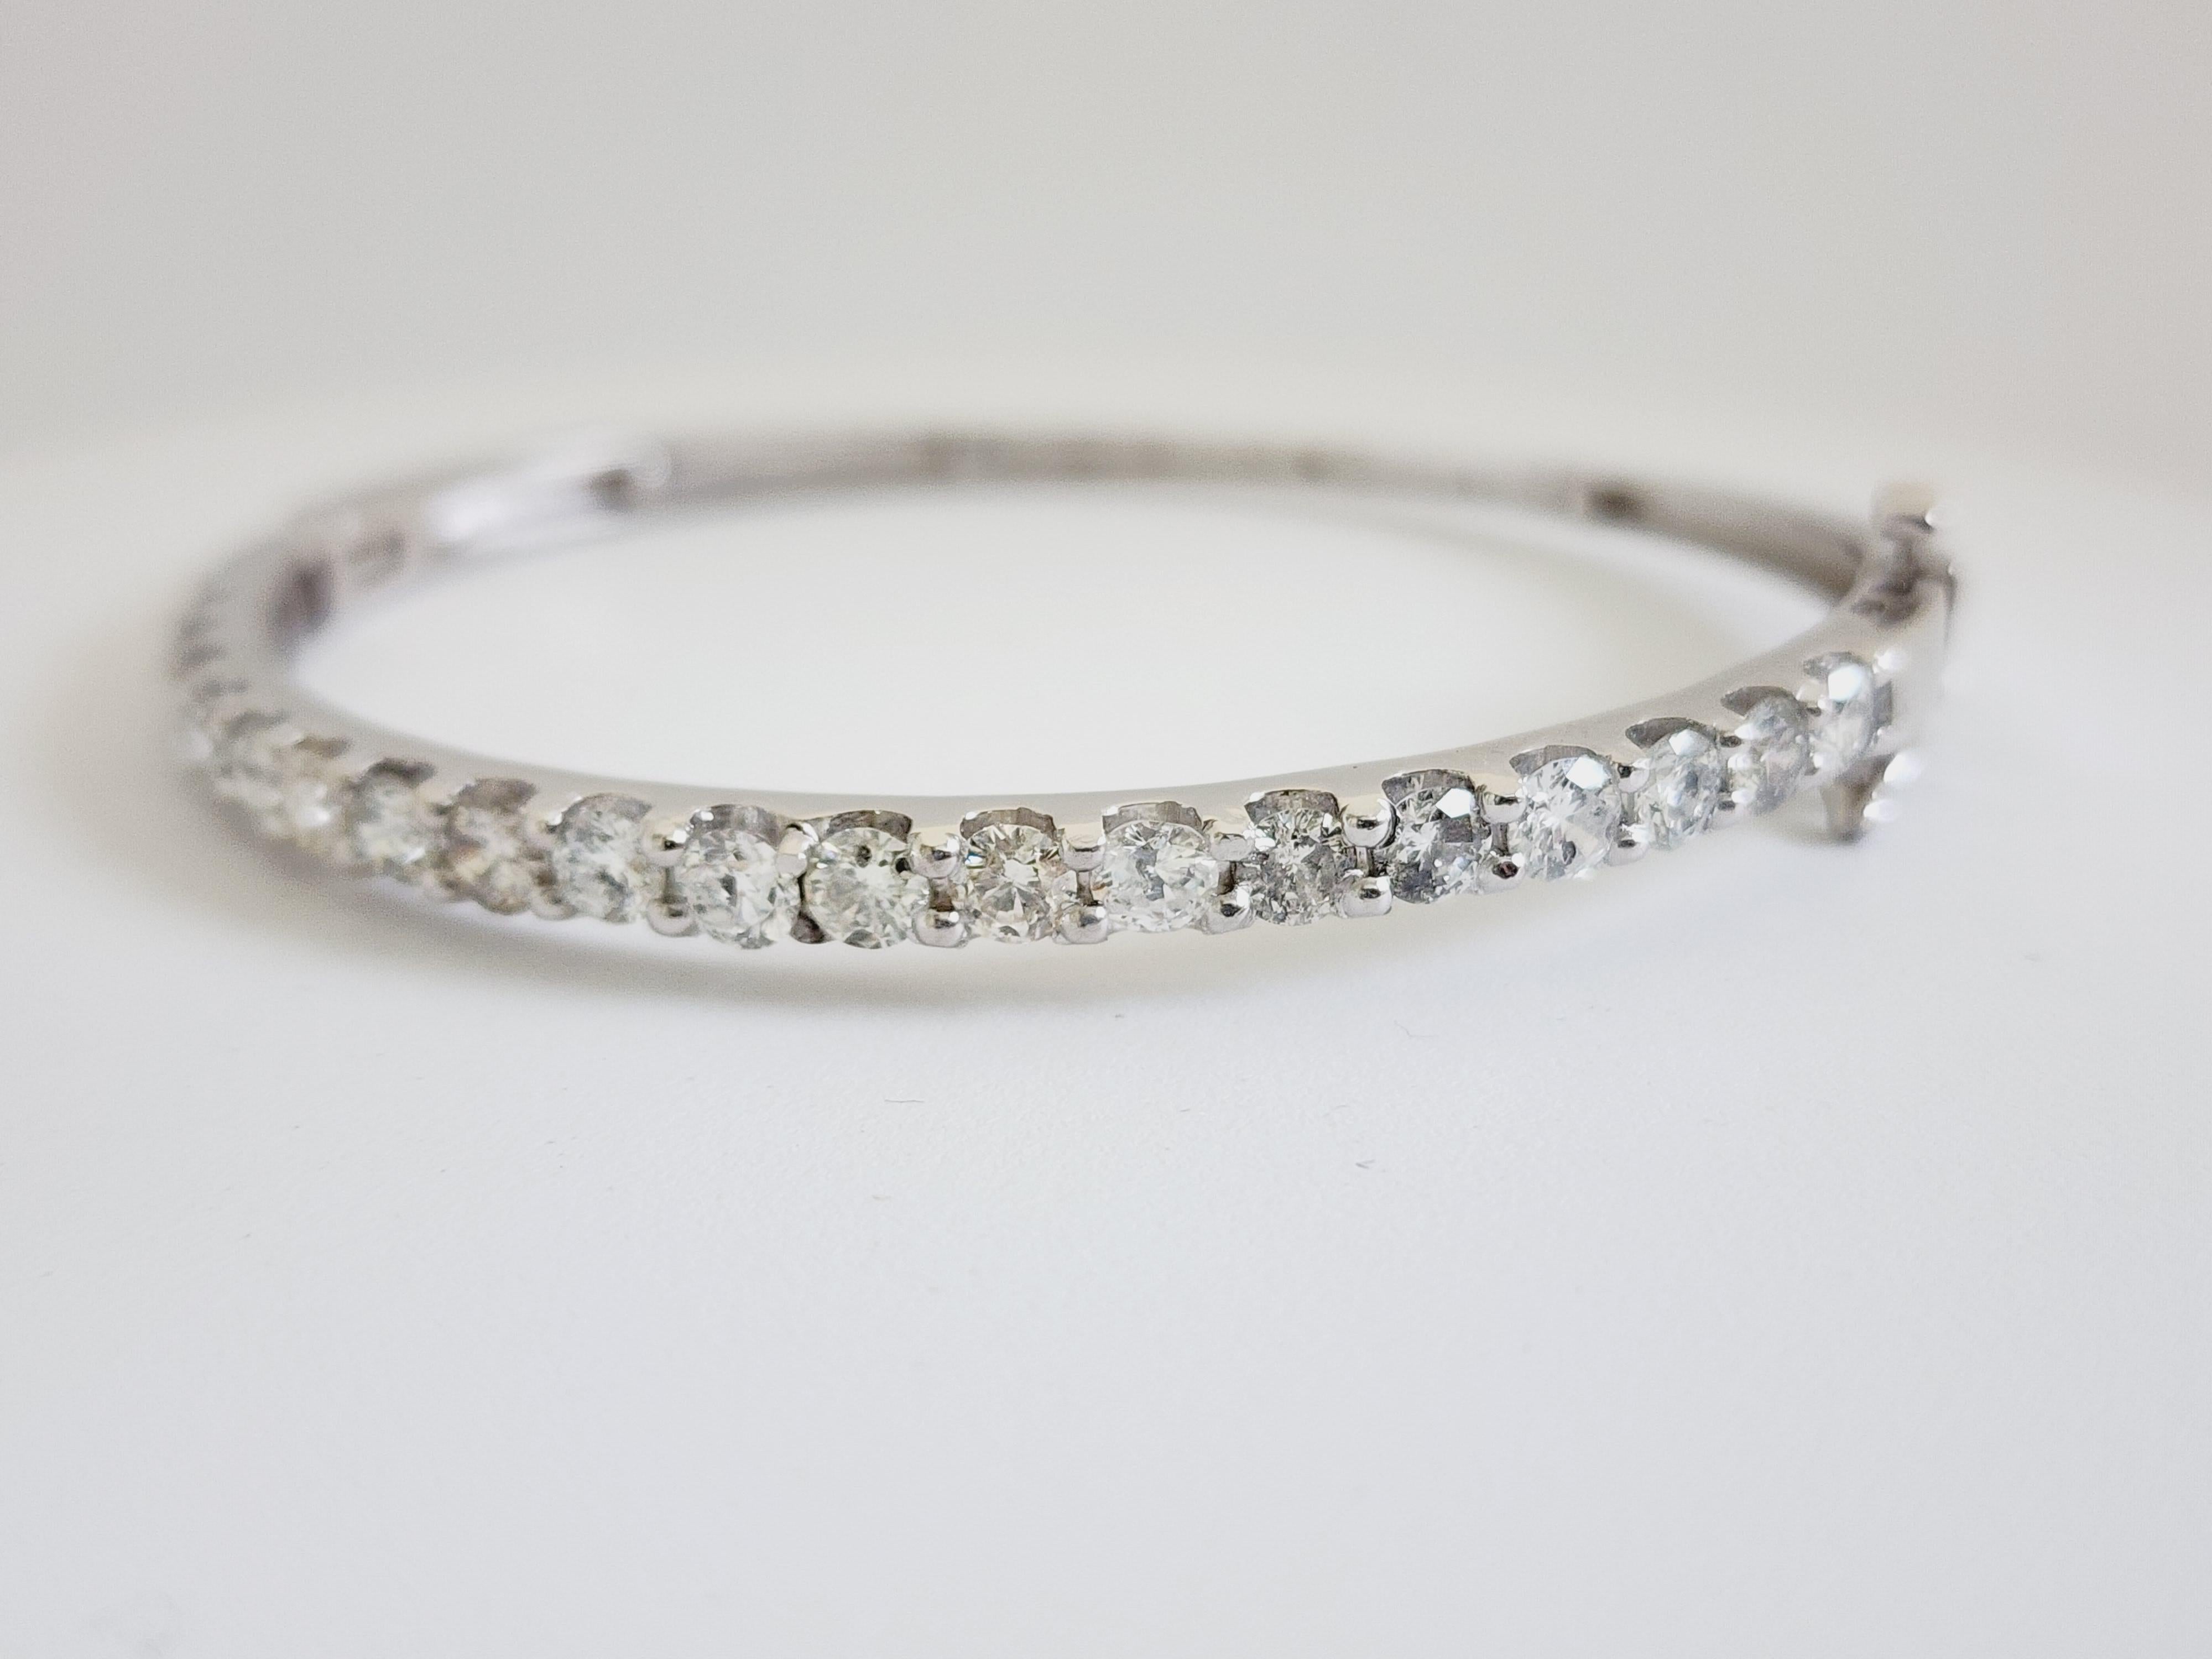 Natural Diamonds 3.73 ctw half way around bangle white gold 14k 7 Inch. 
Average Color I Clarity H, 3.9 mm wide.